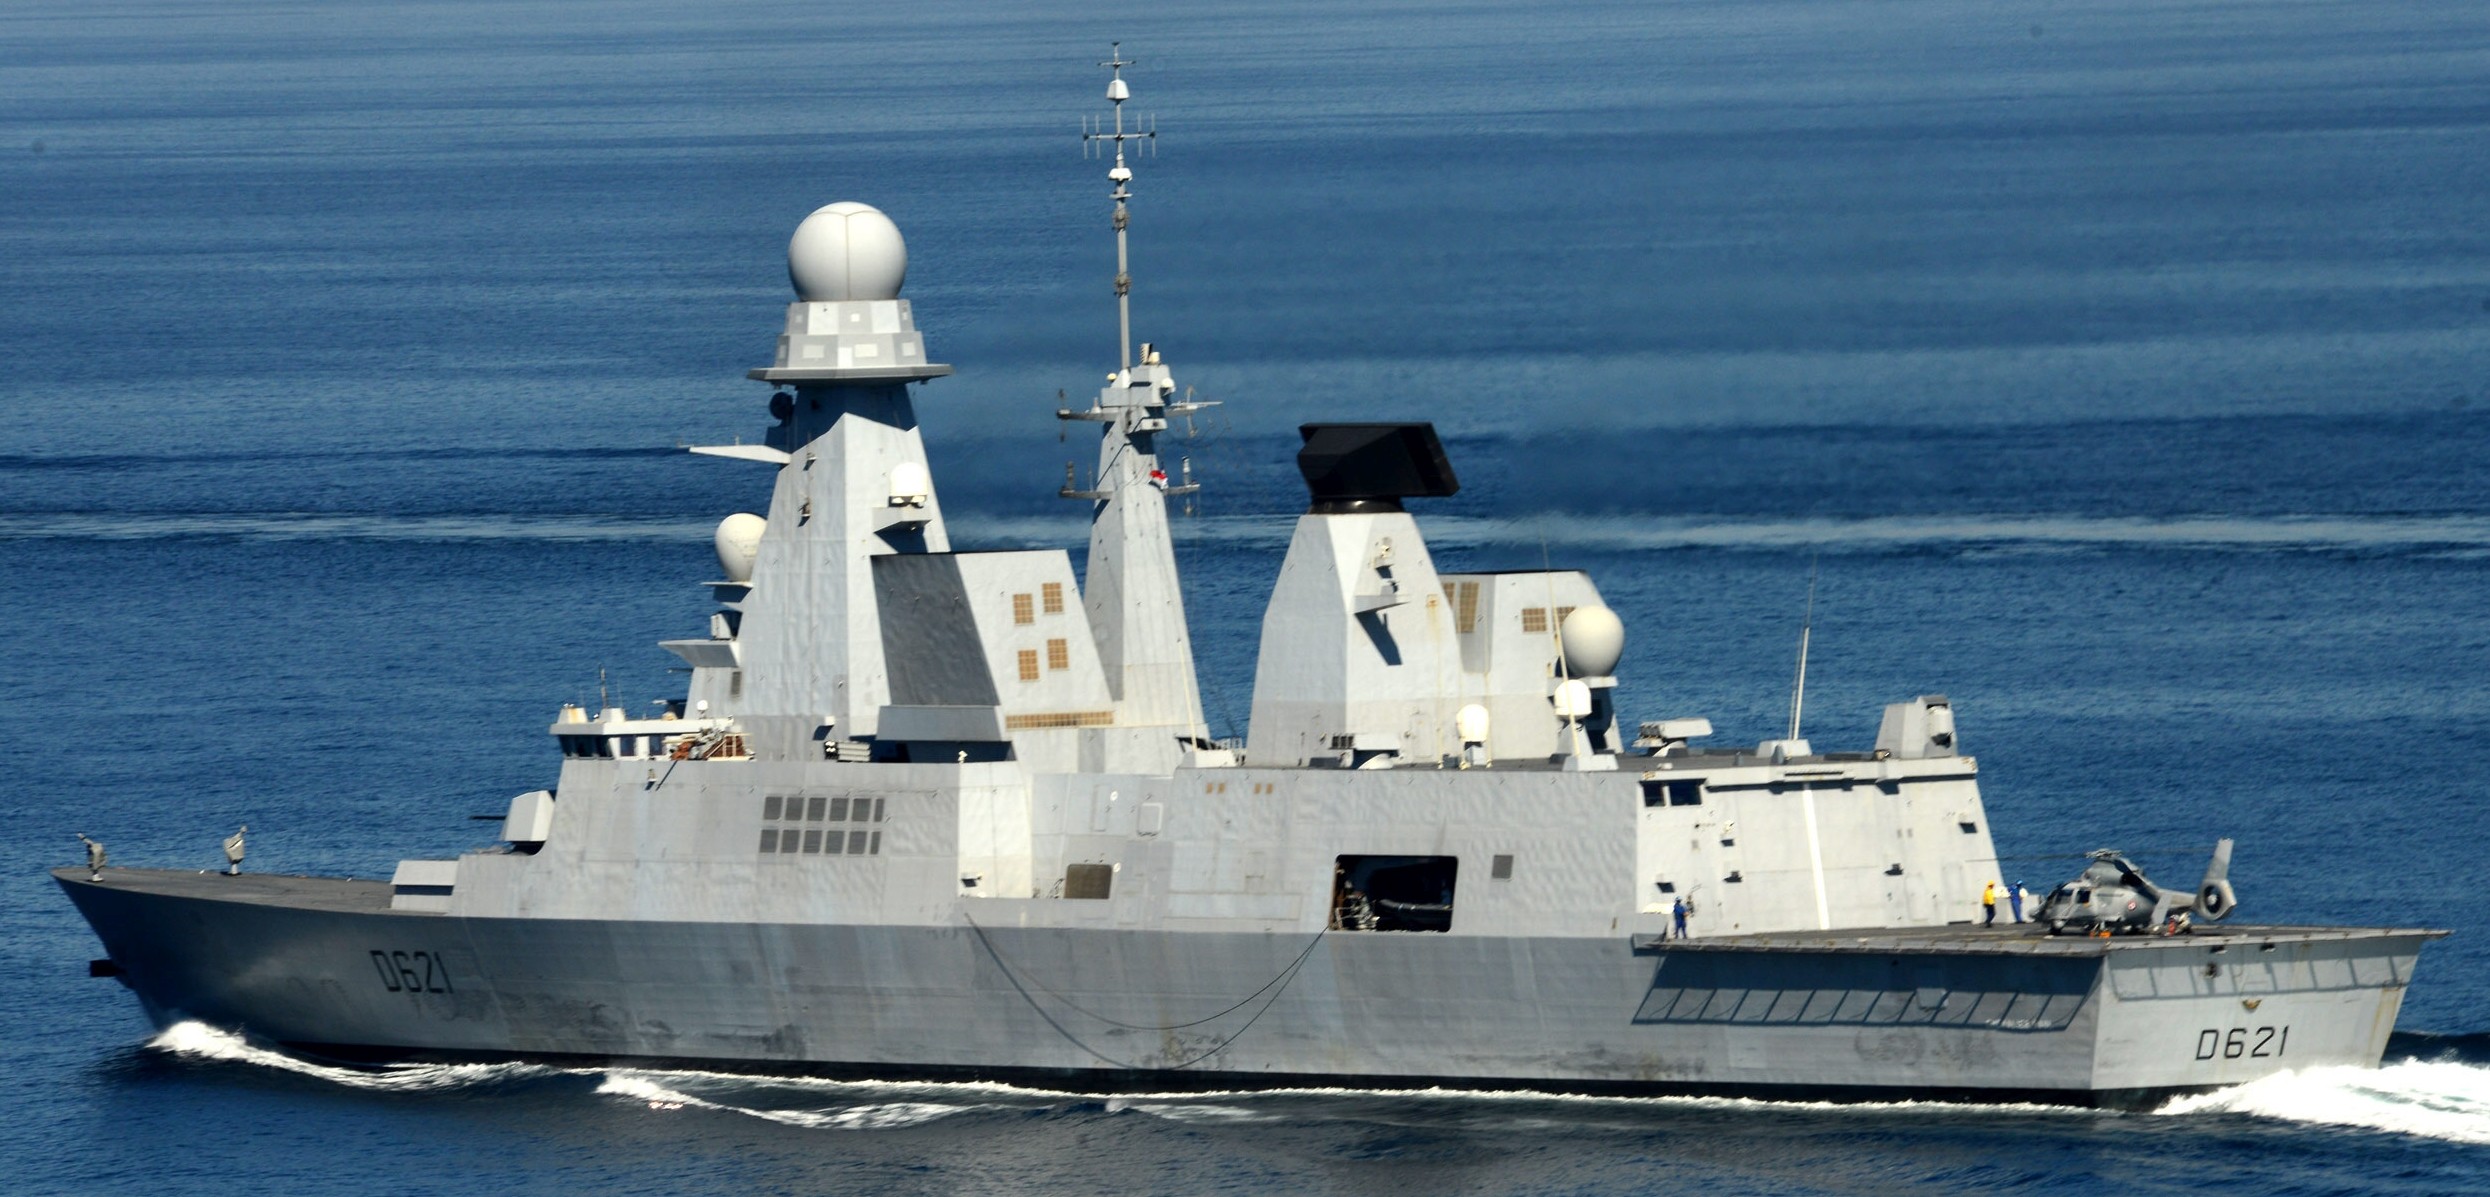 d-621 fs chevalier paul forbin horizon class guided missile frigate anti-air-warfare aaw ffgh french navy marine nationale 12